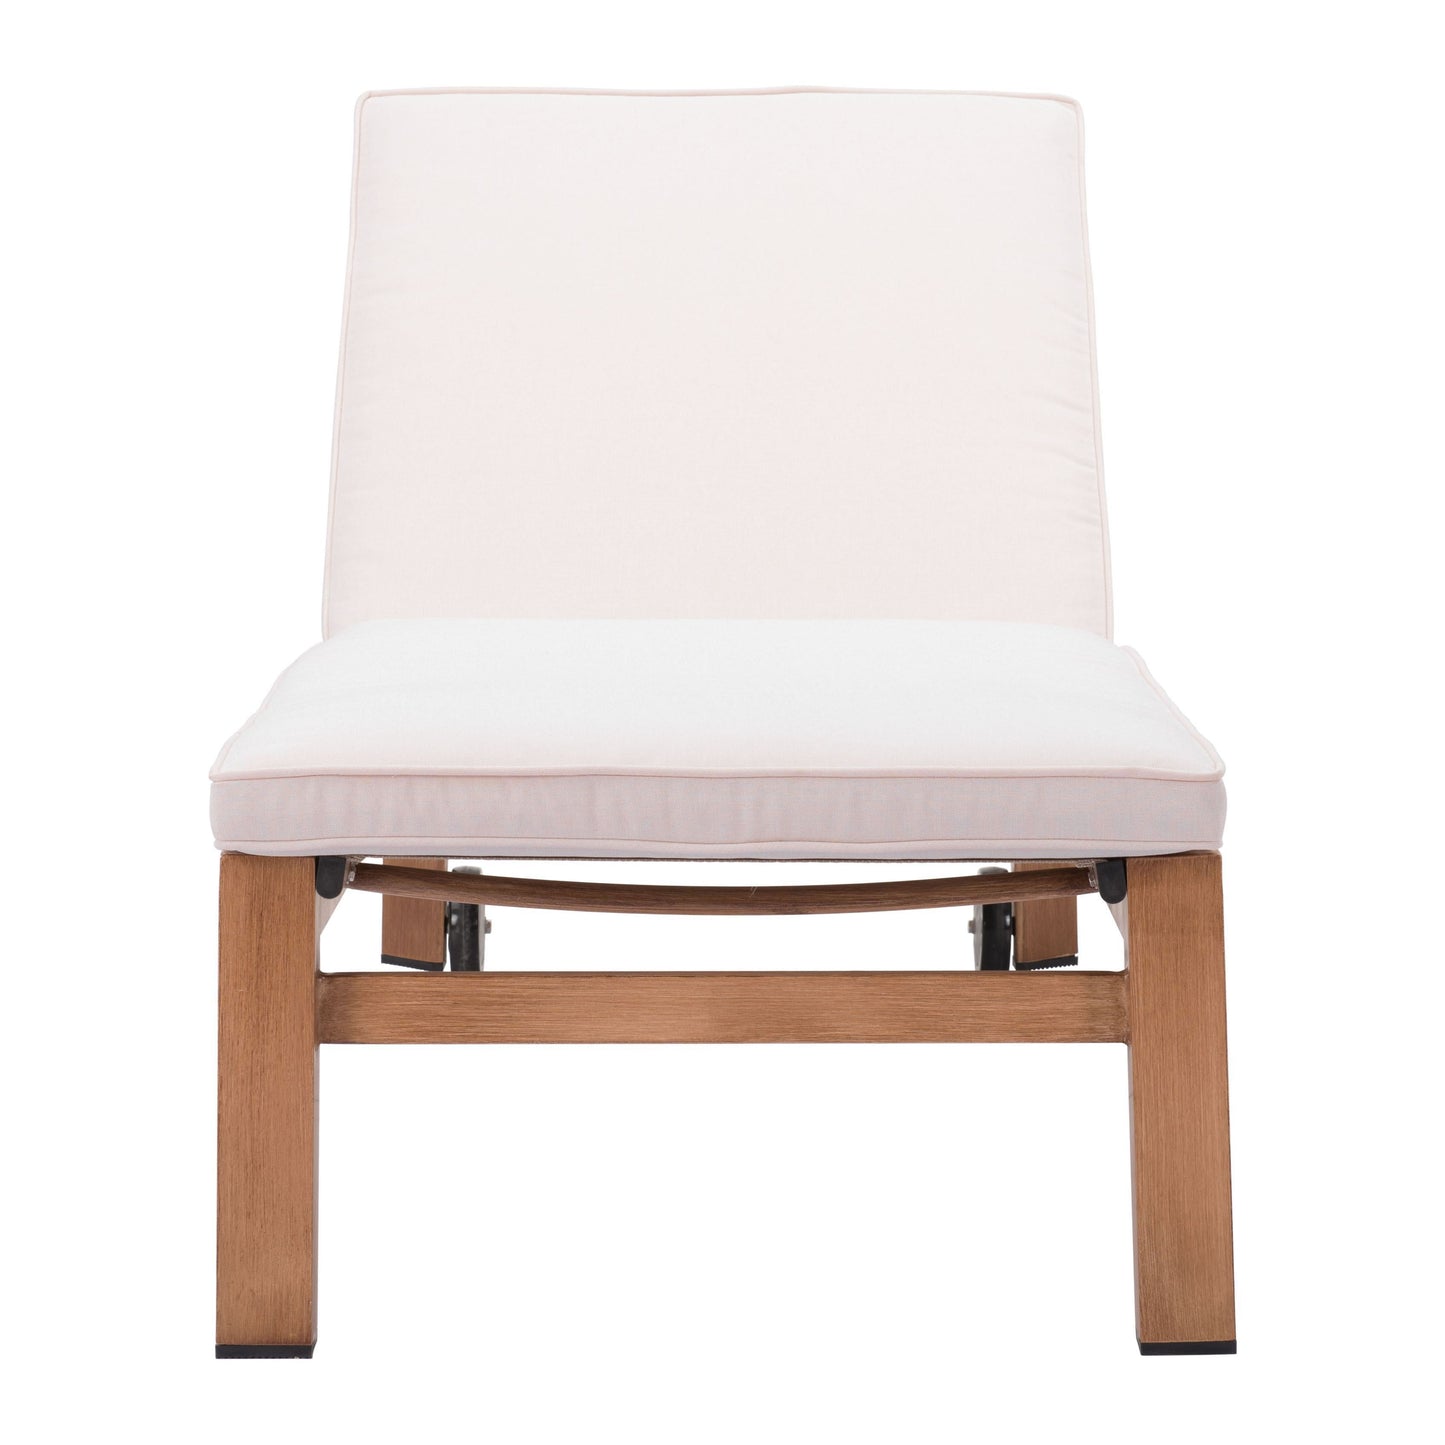 Cozumel Lounge Chair Beige & Natural